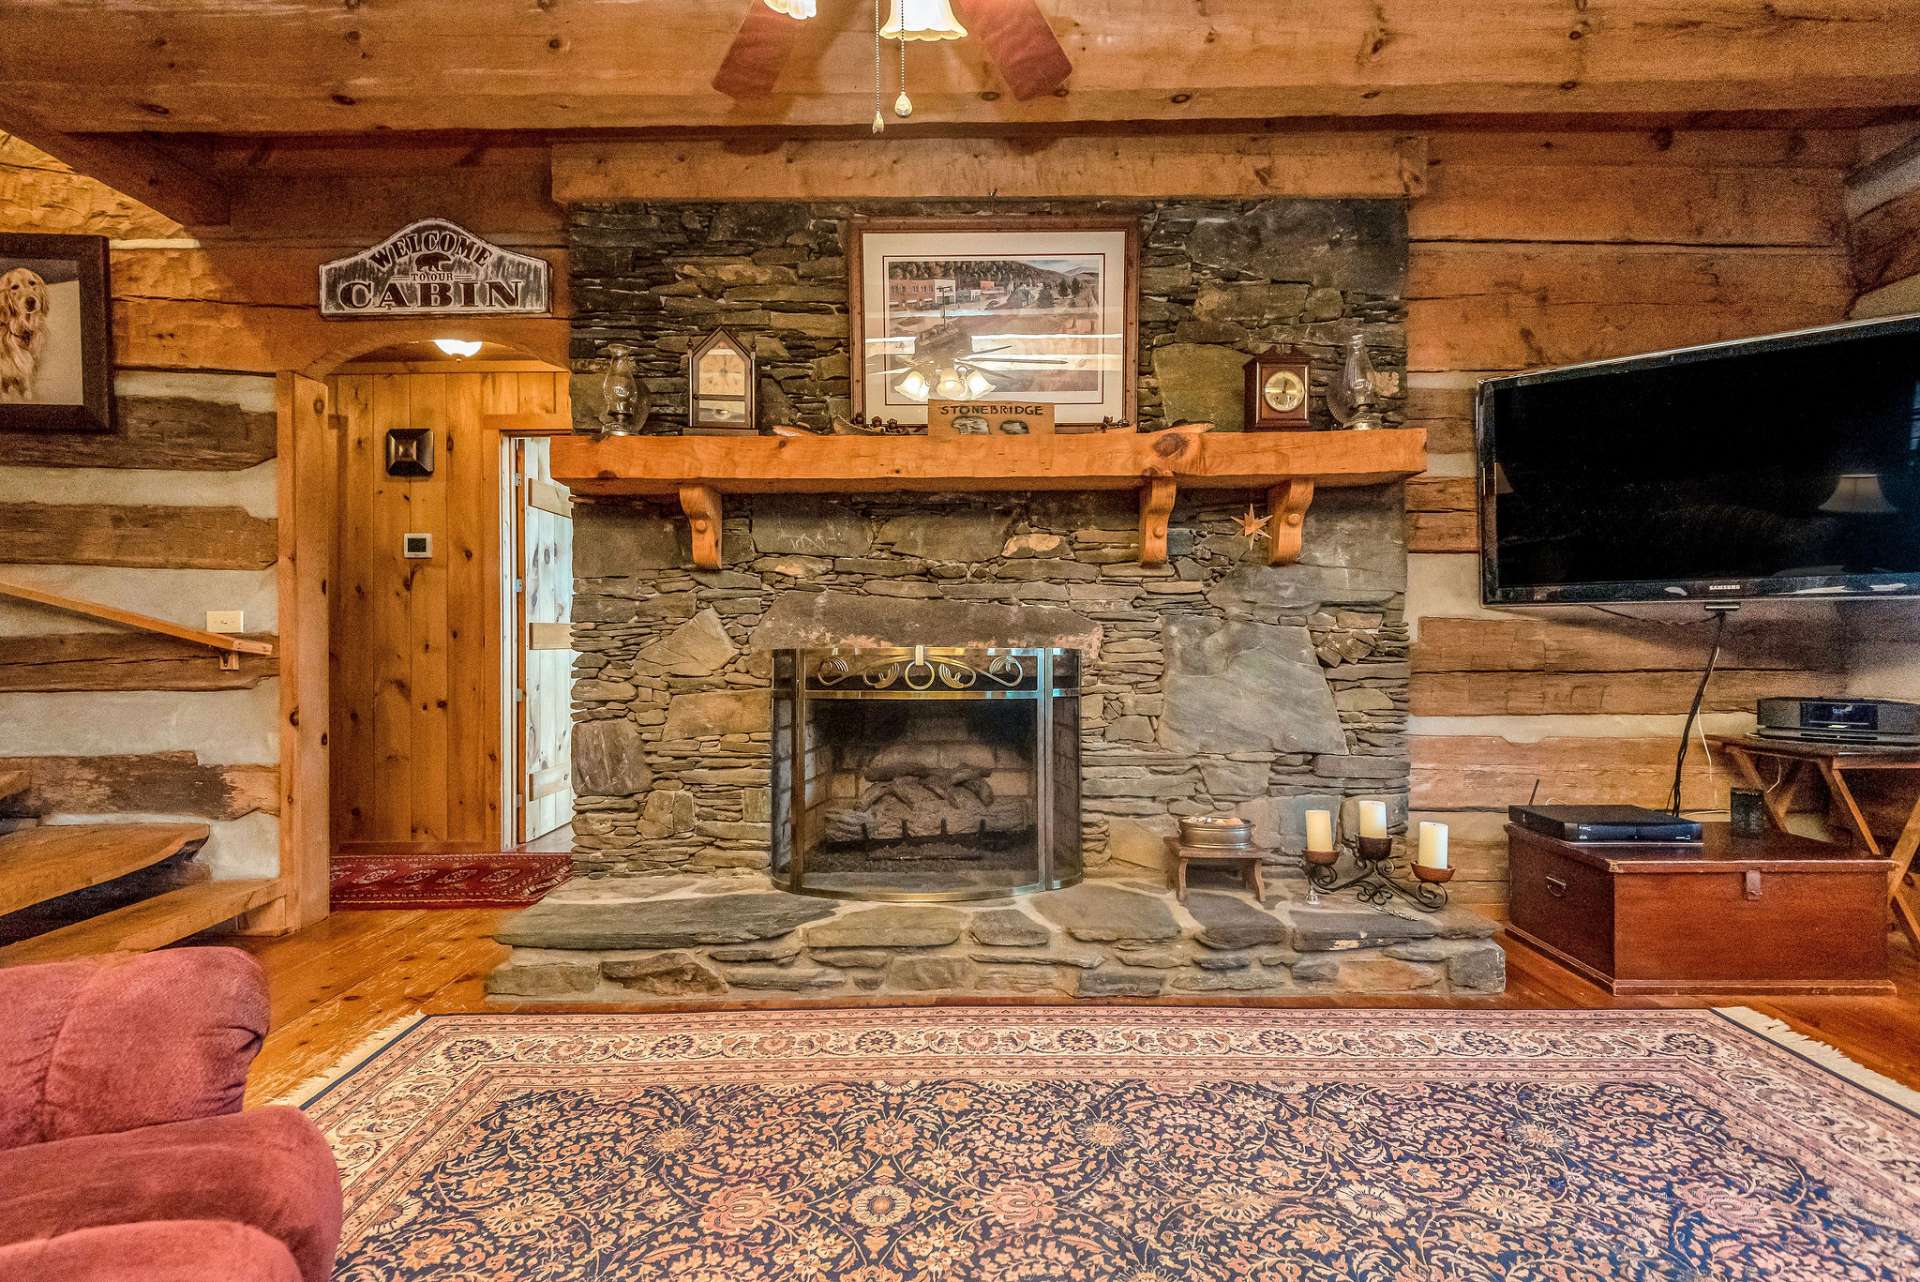 You will enjoy the ambiance and warmth of this stone fireplace on cool winter evenings.